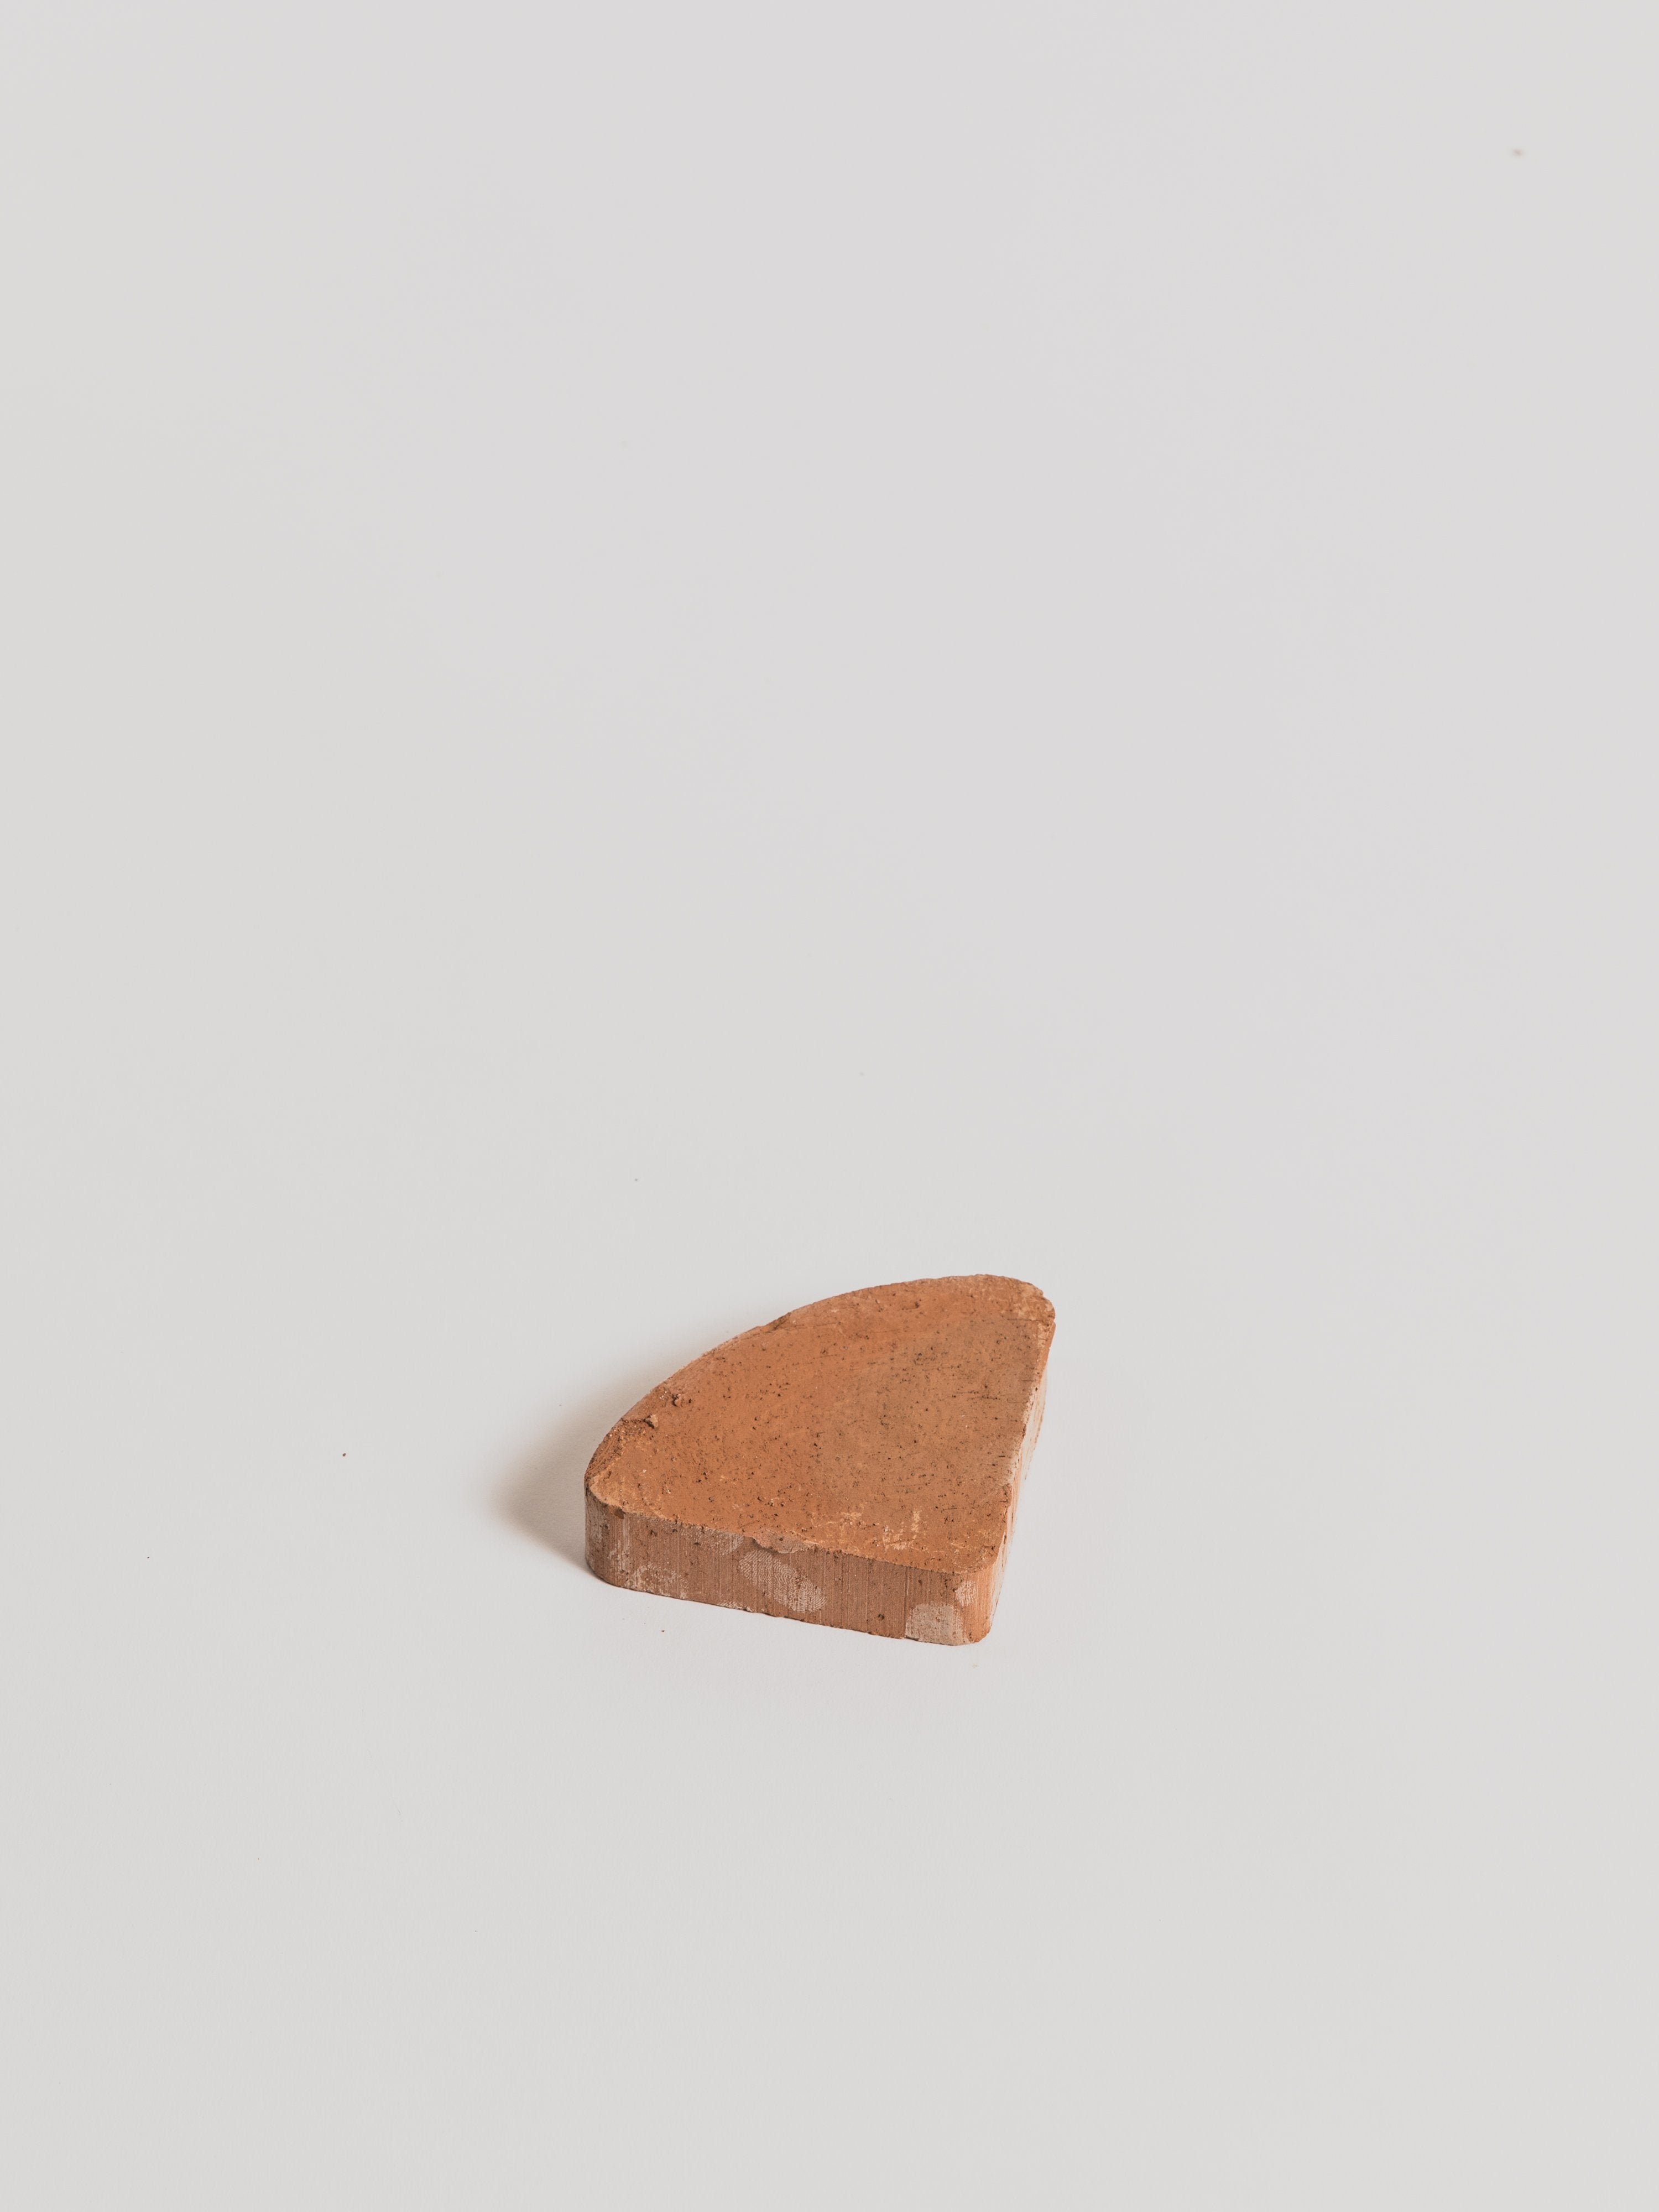 Triangle Foot - Terracotta (Bergs Potter) Pottery Bergs Potter 